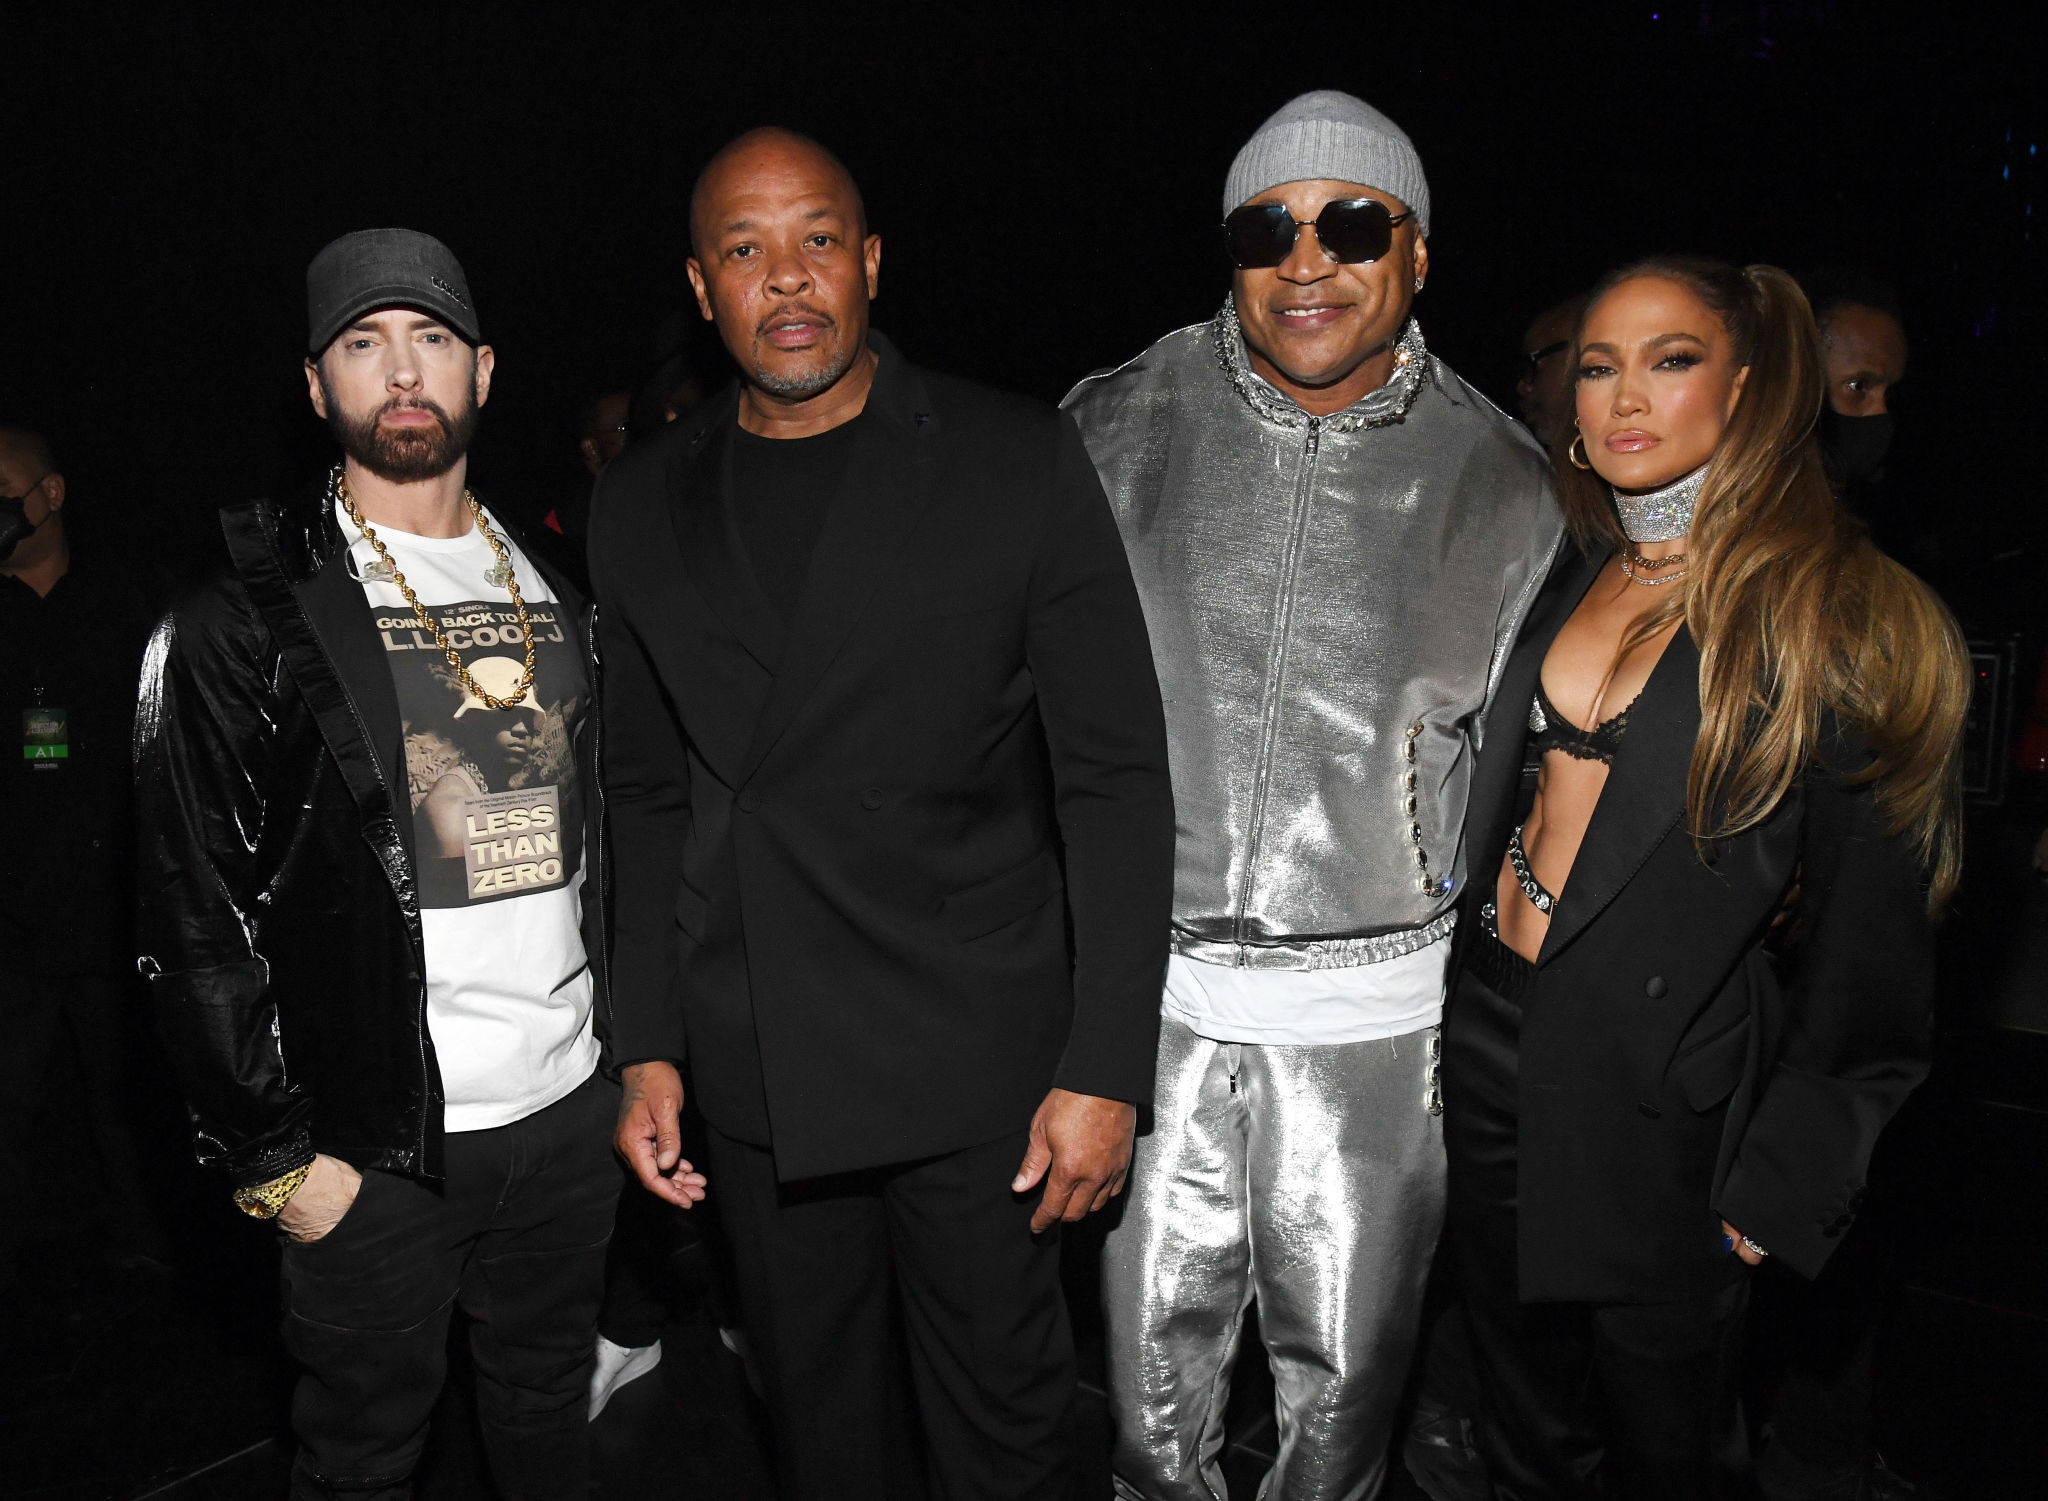 CLEVELAND, OHIO - OCTOBER 30: (L-R) Eminem, Dr. Dre, LL Cool J, and Jennifer Lopez pose backstage during the 36th Annual Rock & Roll Hall Of Fame Induction Ceremony at Rocket Mortgage Fieldhouse on October 30, 2021 in Cleveland, Ohio. (Photo by Kevin Mazur/Getty Images for The Rock and Roll Hall of Fame )